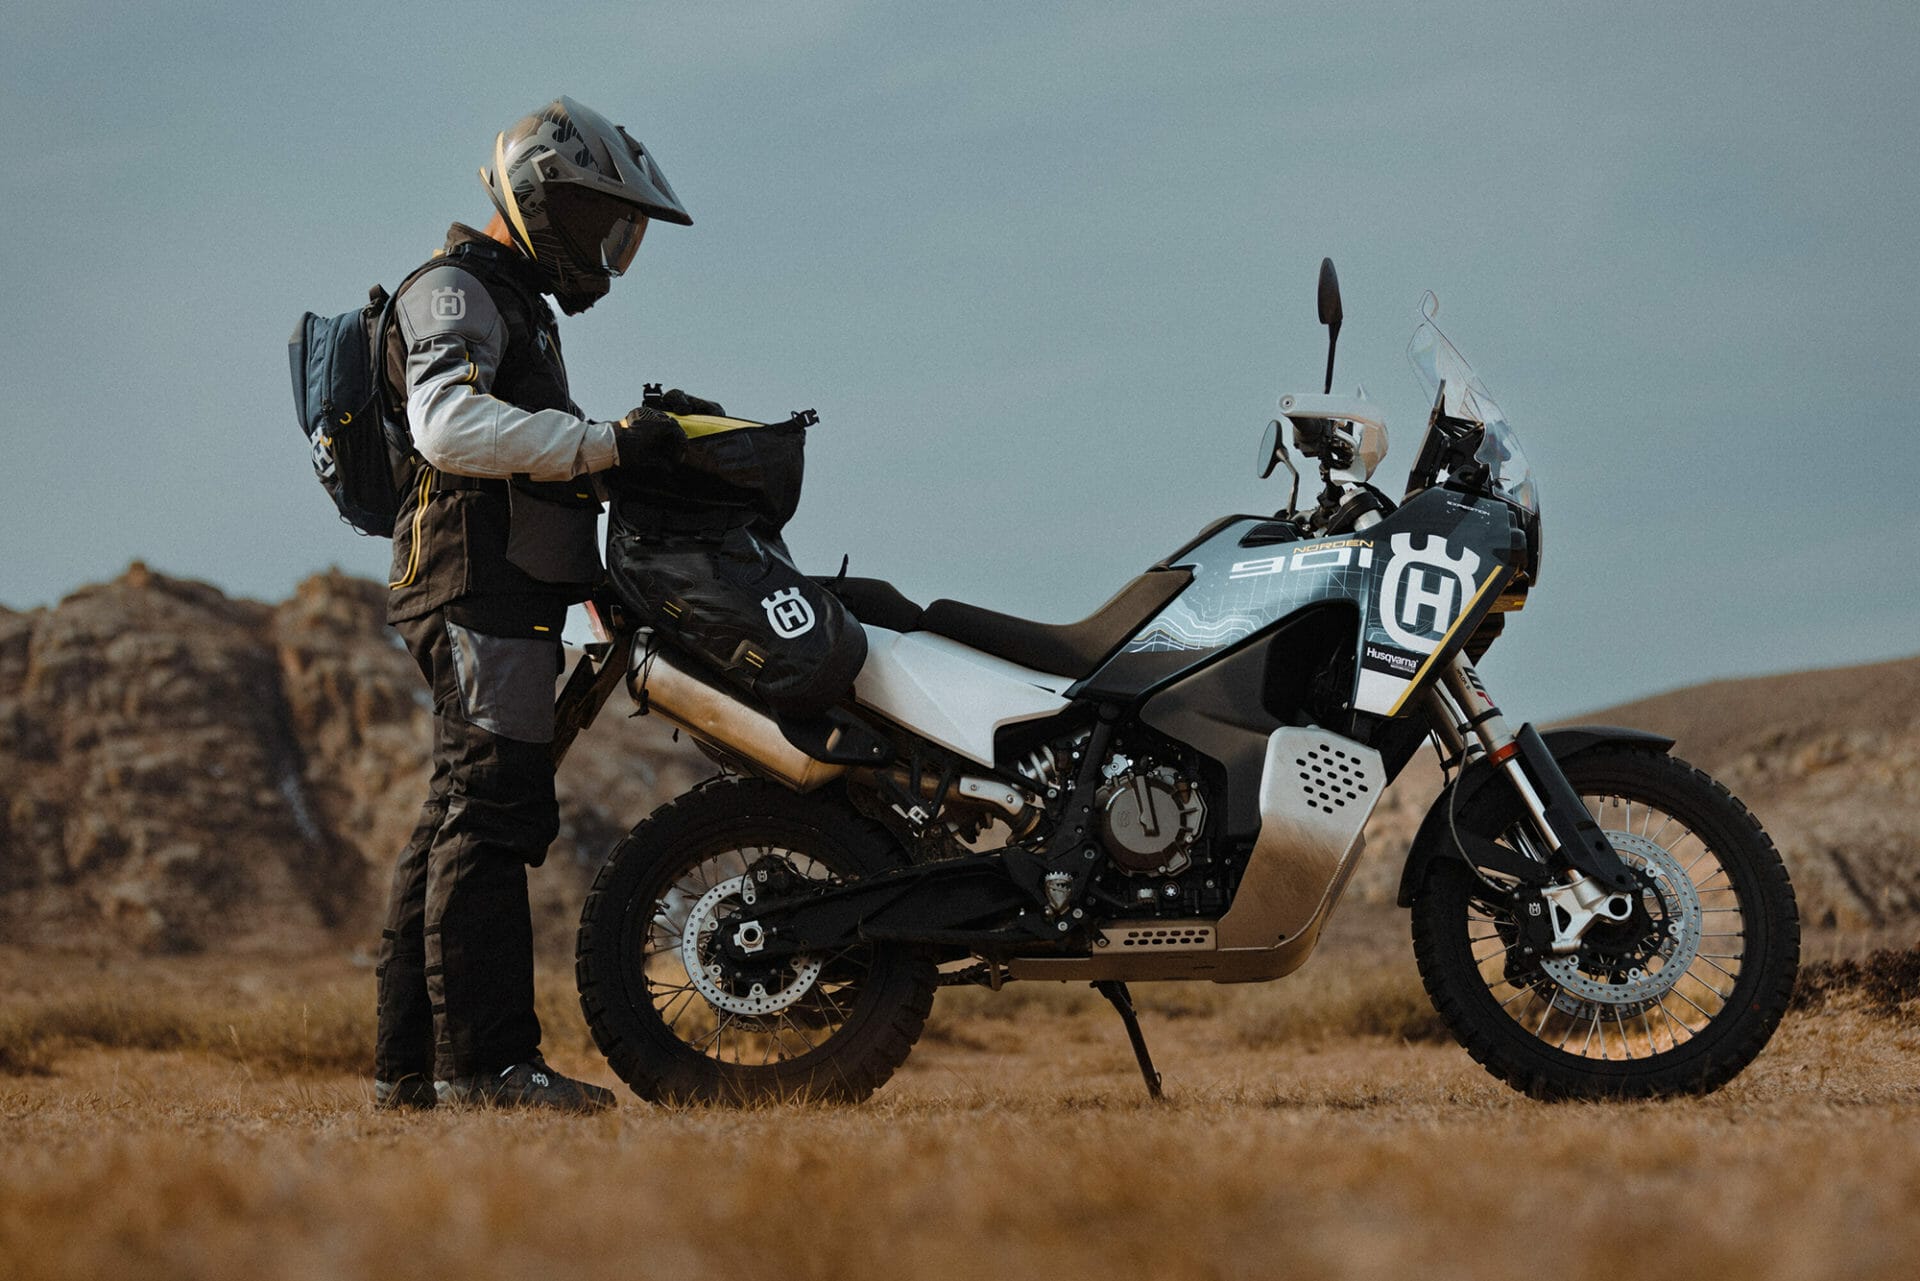 Husqvarna Motorcycles unveils the new Norden 901 Expedition 2023 – An exciting new touring motorcycle for boundless adventure